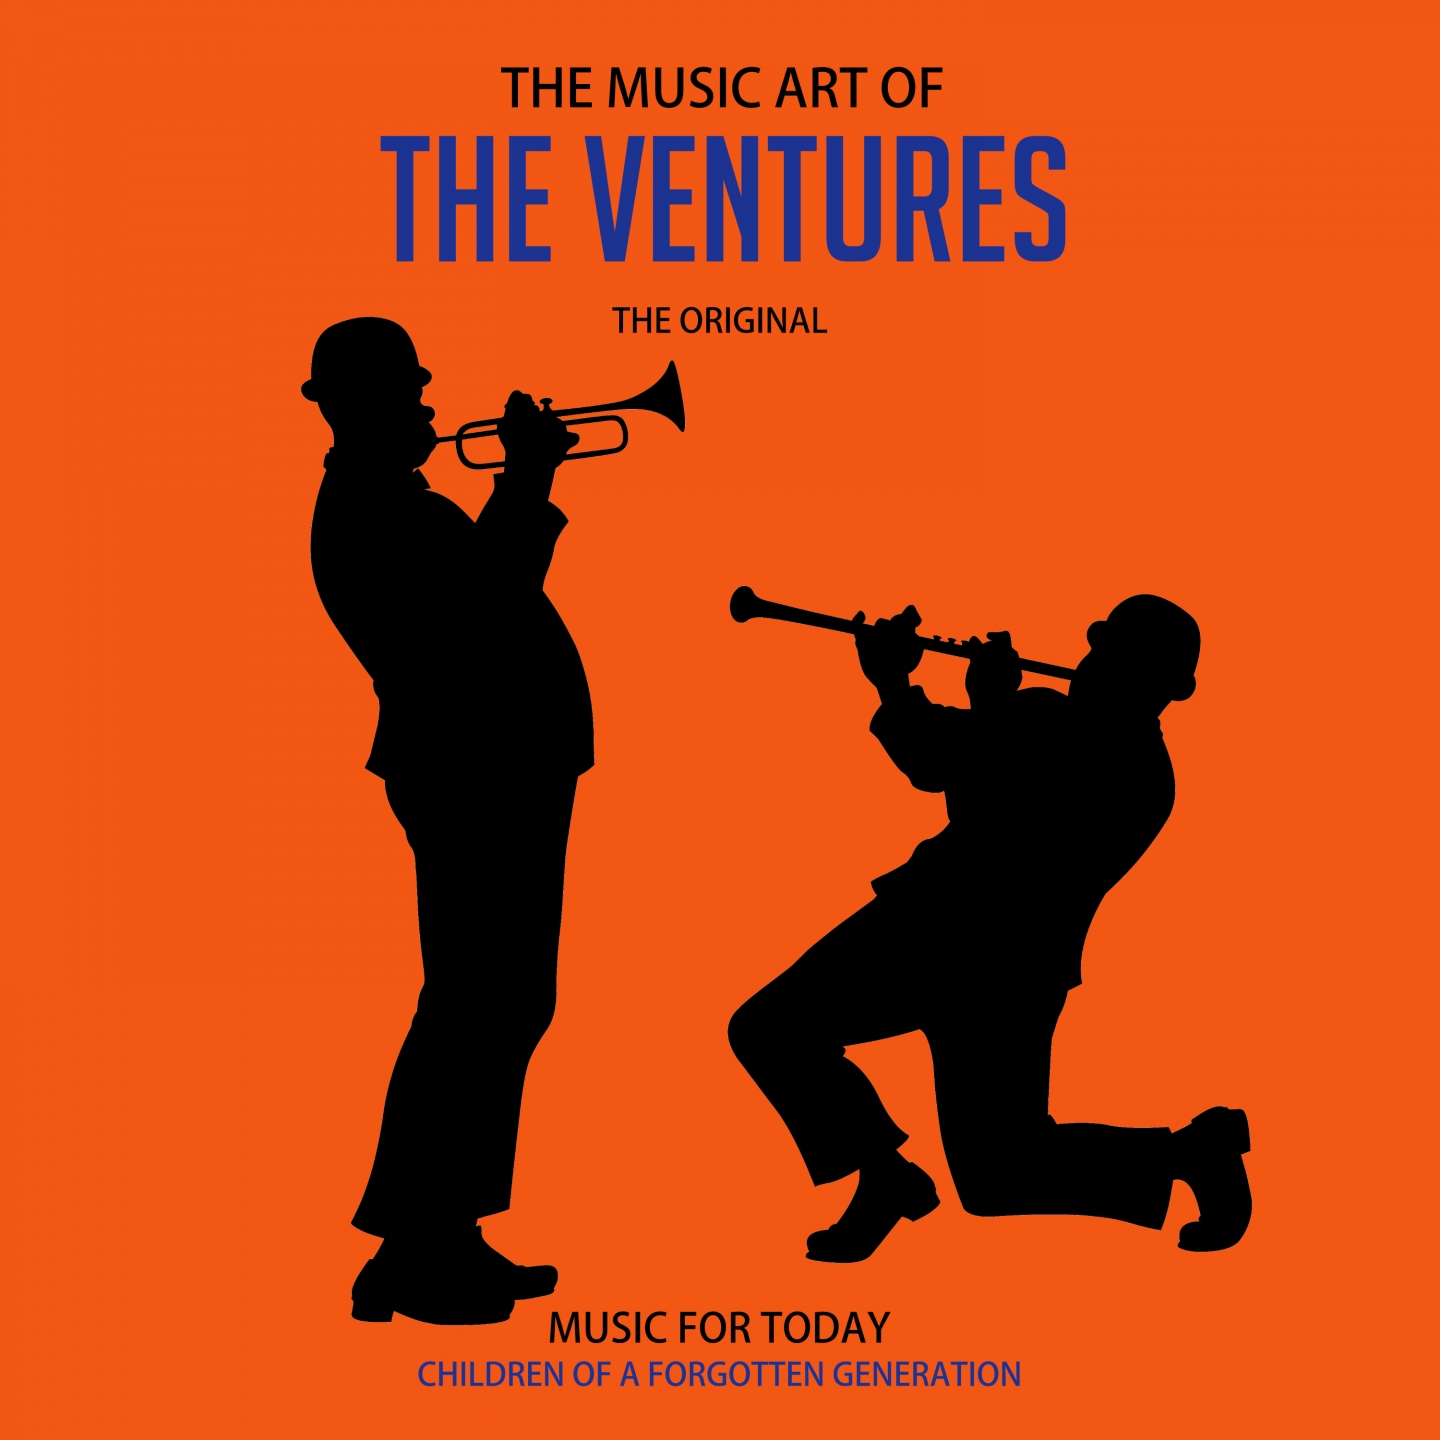 The Music Art of The Ventures